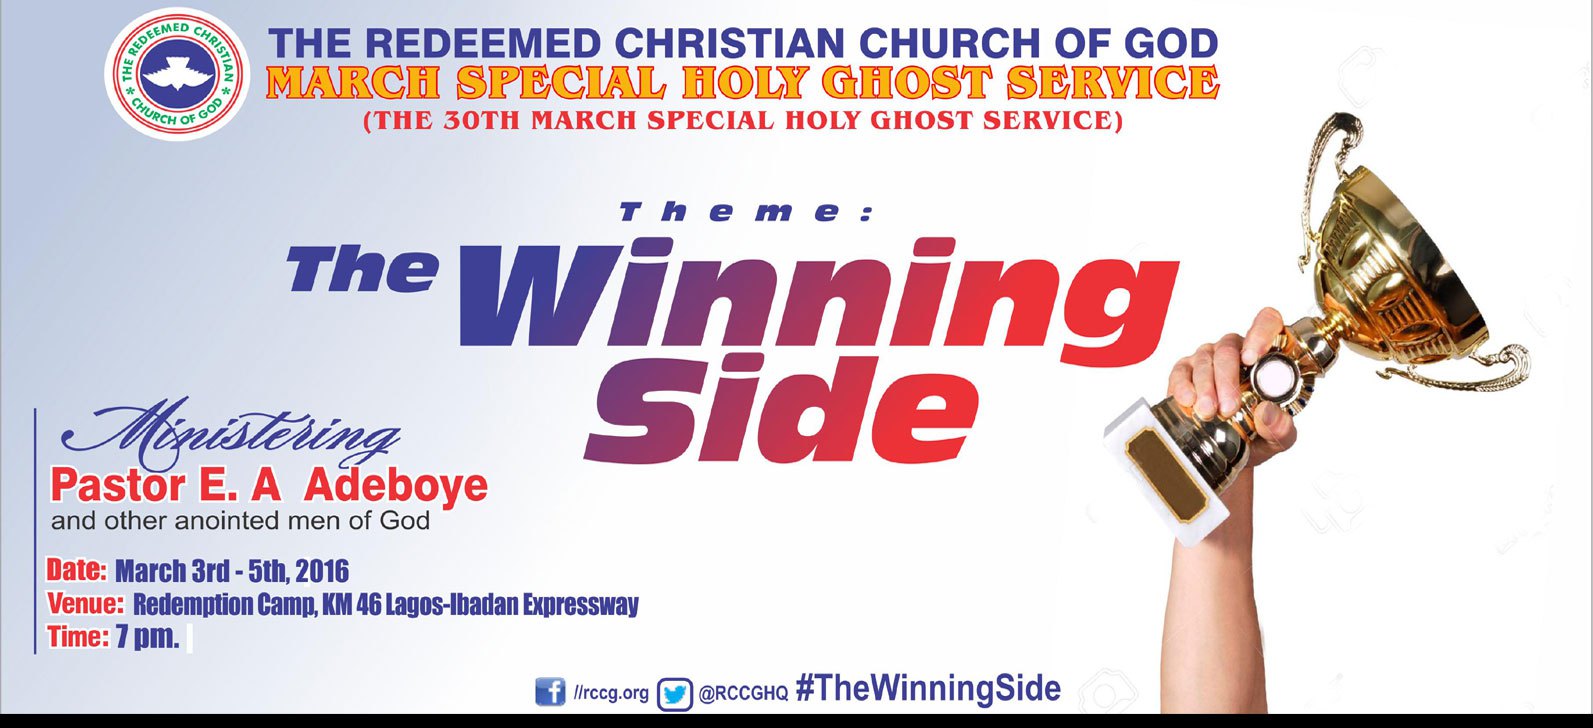 RCCG March 2016 Special Holy Ghost Service. The Winning Side.